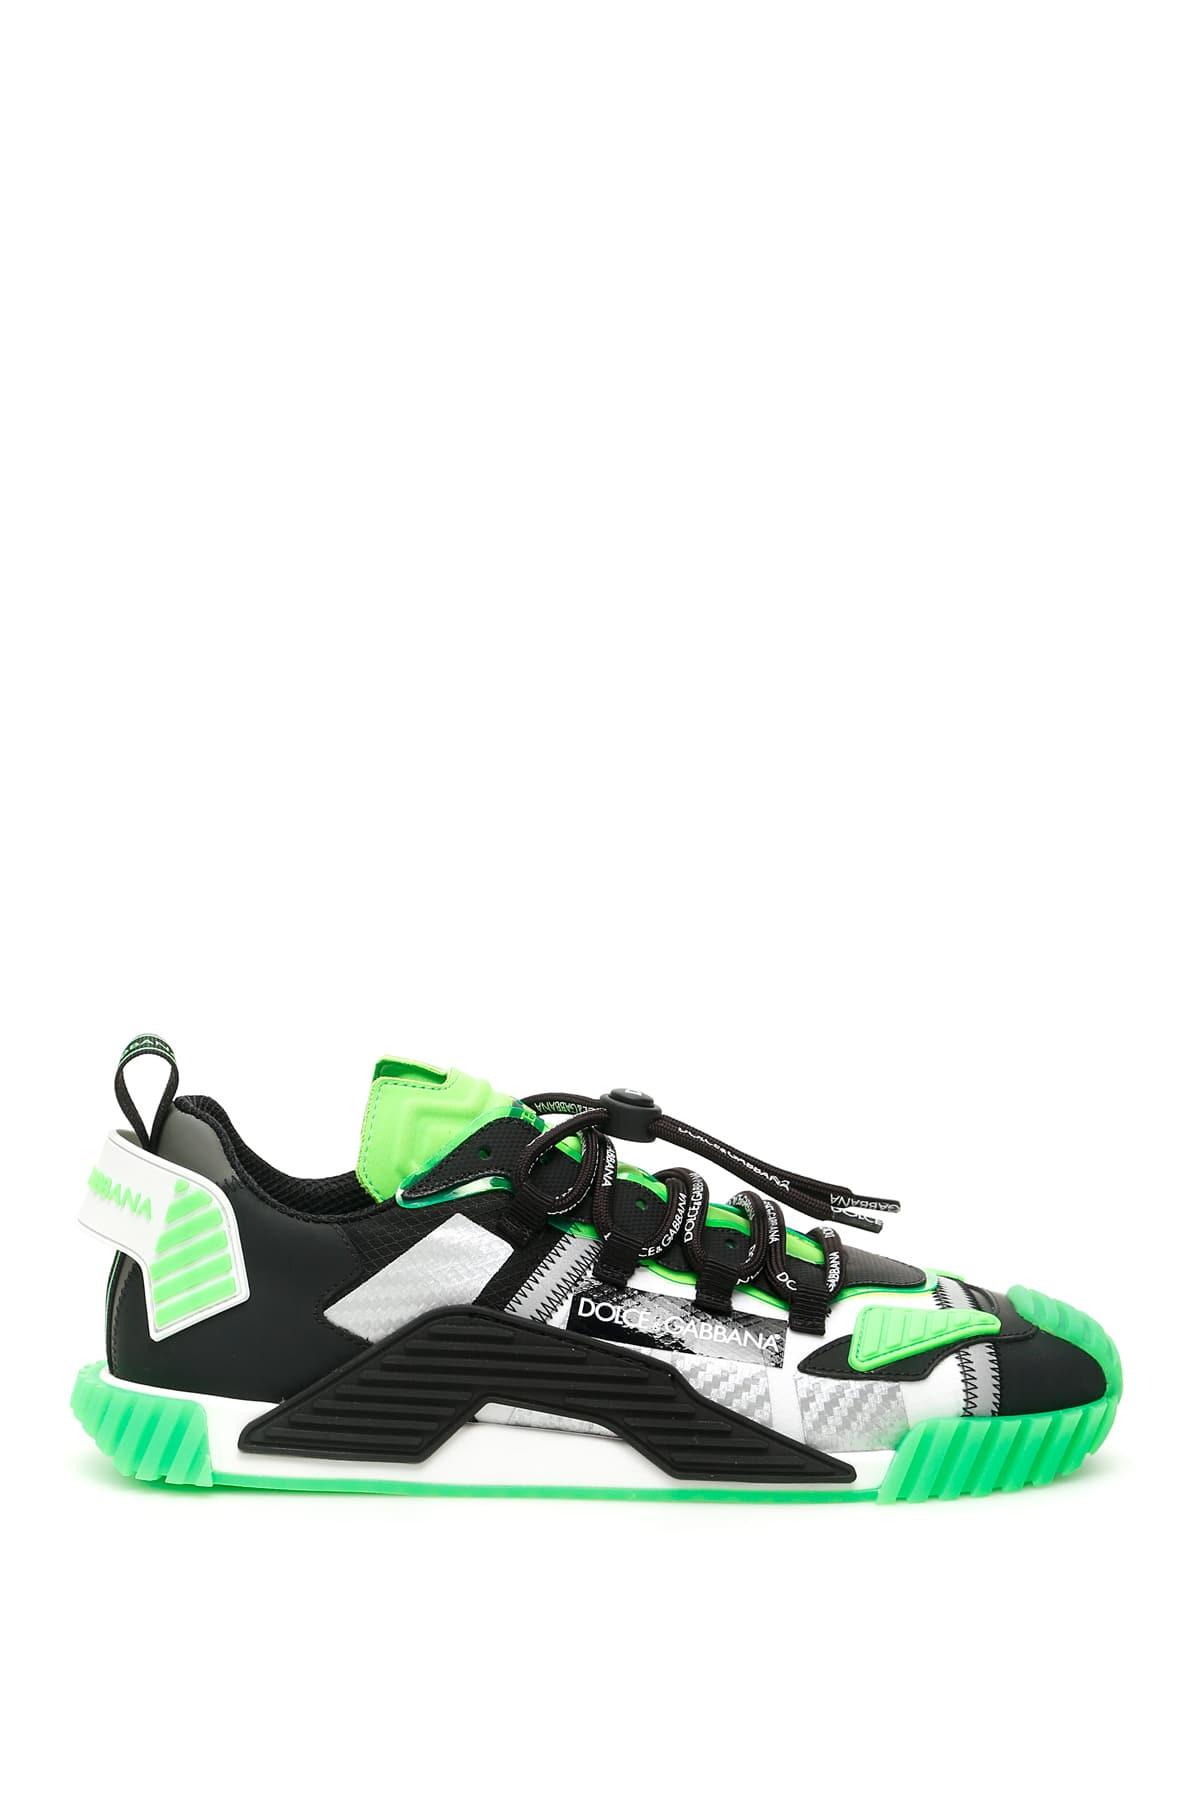 Dolce & Gabbana Suede Ns1 Sneakers In Mixed Materials in Black,Green,White ( Green) for Men | Lyst